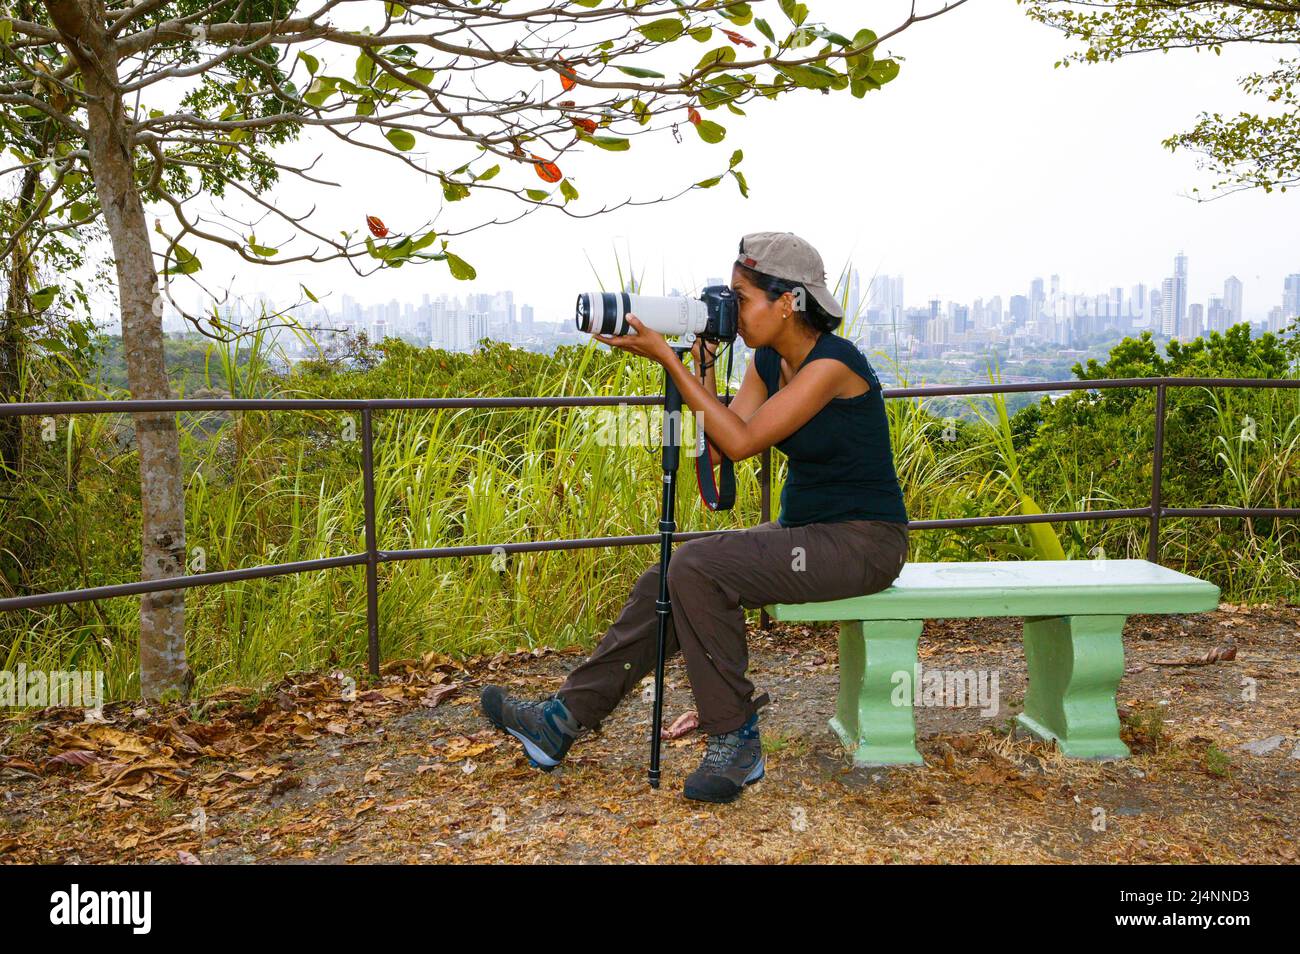 A tourist is taking pictures in Metropolitan park, Panama City, Panama province, Republic of Panama, Central America. Stock Photo